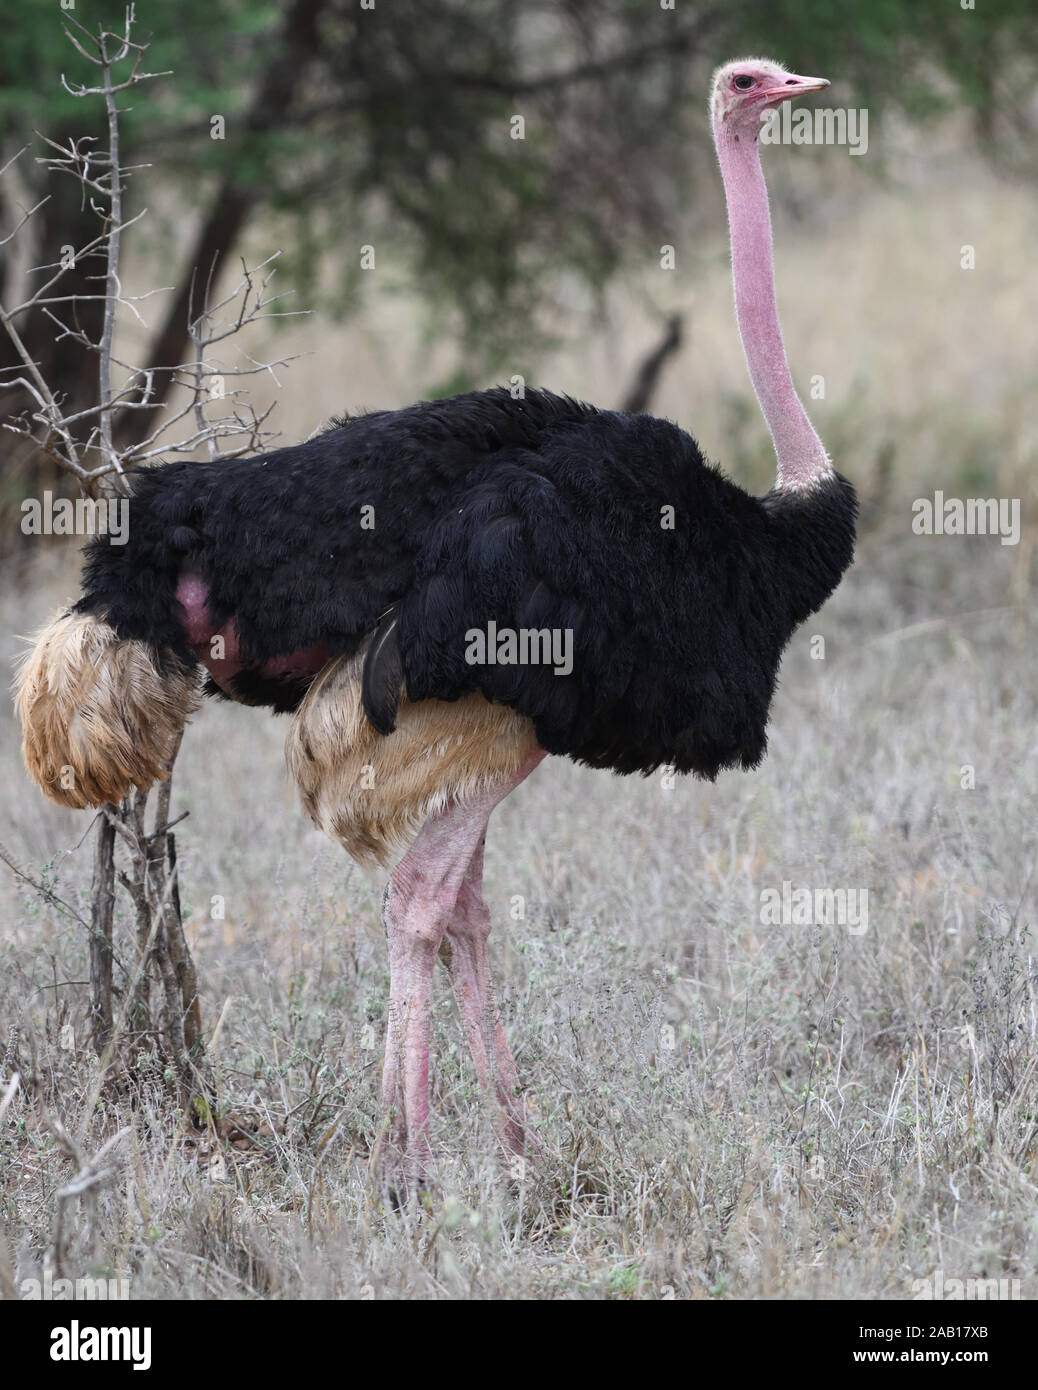 A male  common ostrich (Struthio camelus) with its characteristic black and white plumage,  Tarangire National Park, Tanzania. Stock Photo